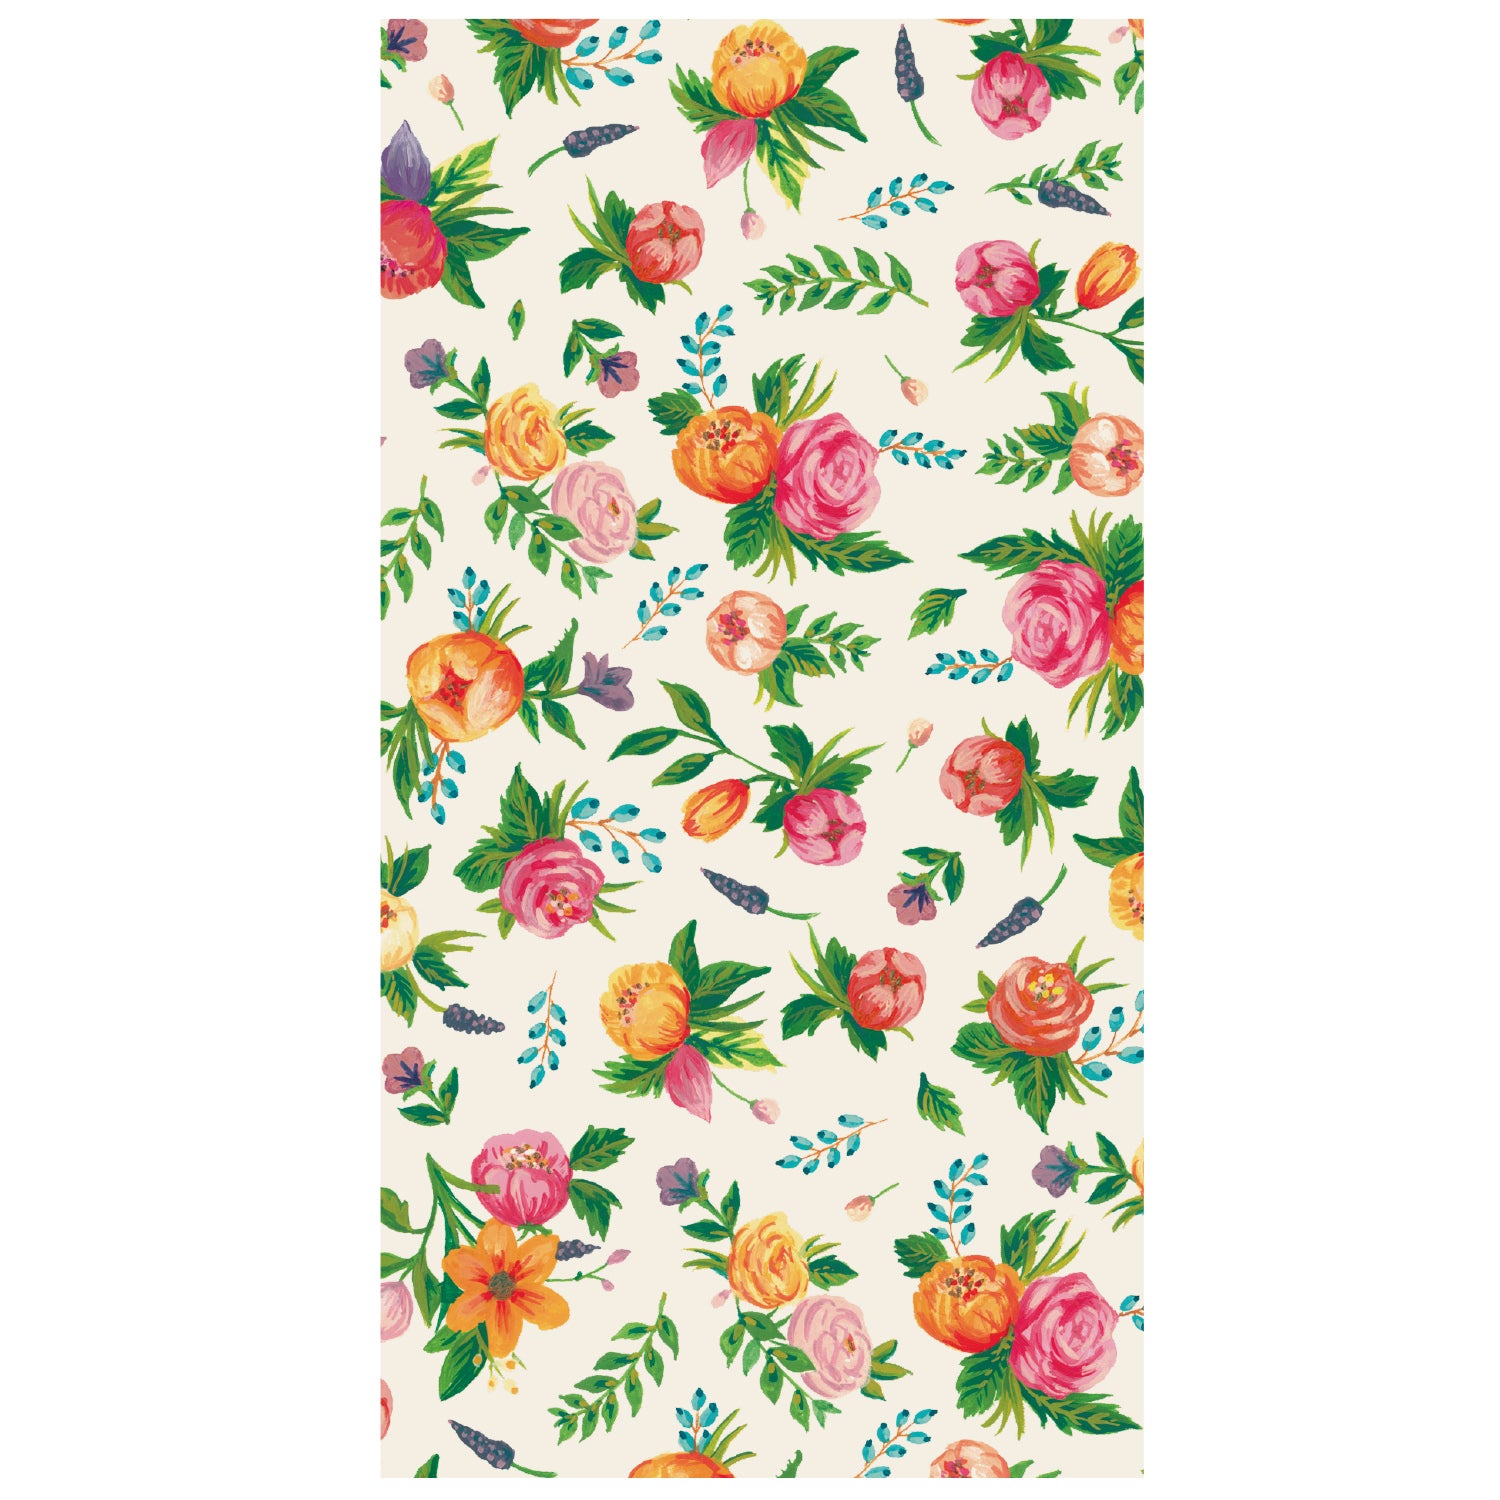 Sweet Garden Napkins, a colorful floral pattern perfect for garden parties found on a white background, by Hester &amp; Cook.